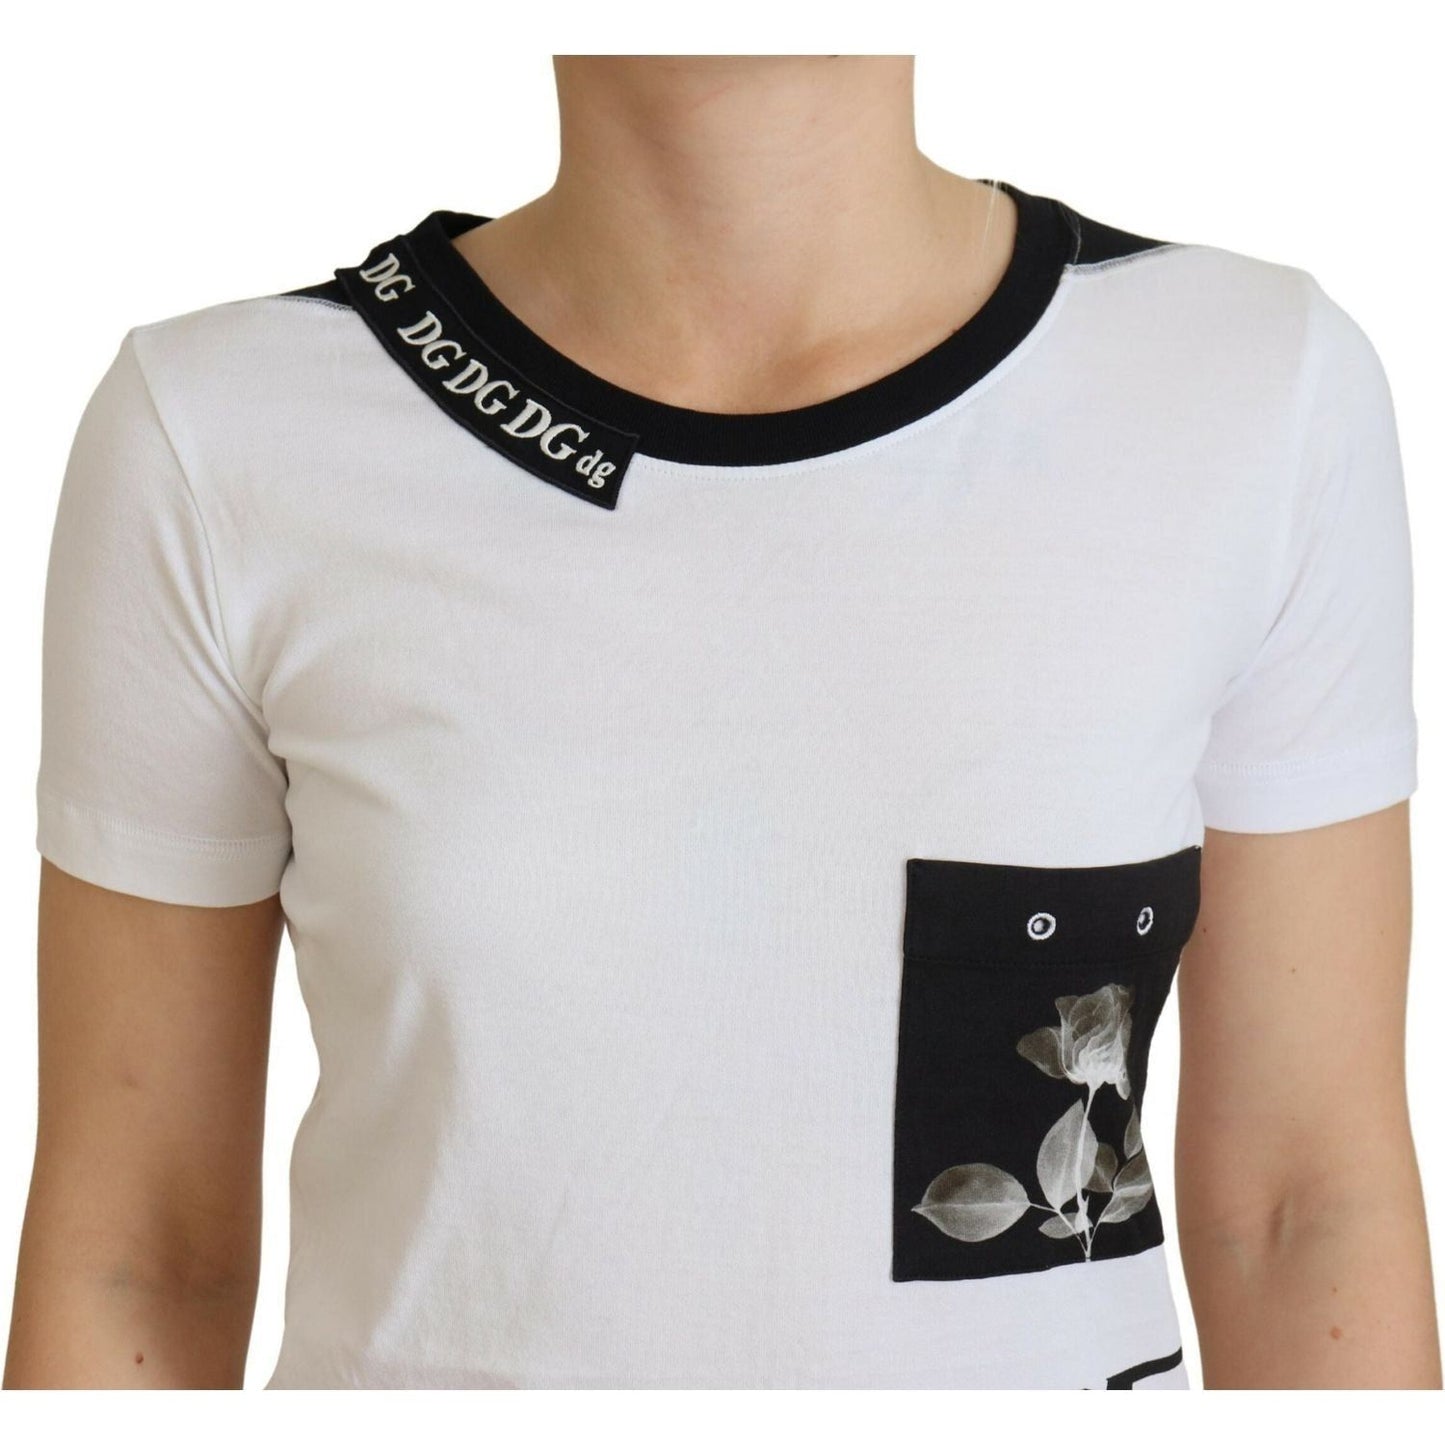 Dolce & Gabbana Chic Monochrome 'Here and Now' Cotton Tee white-cotton-t-shirt-crewneck-t-shirt